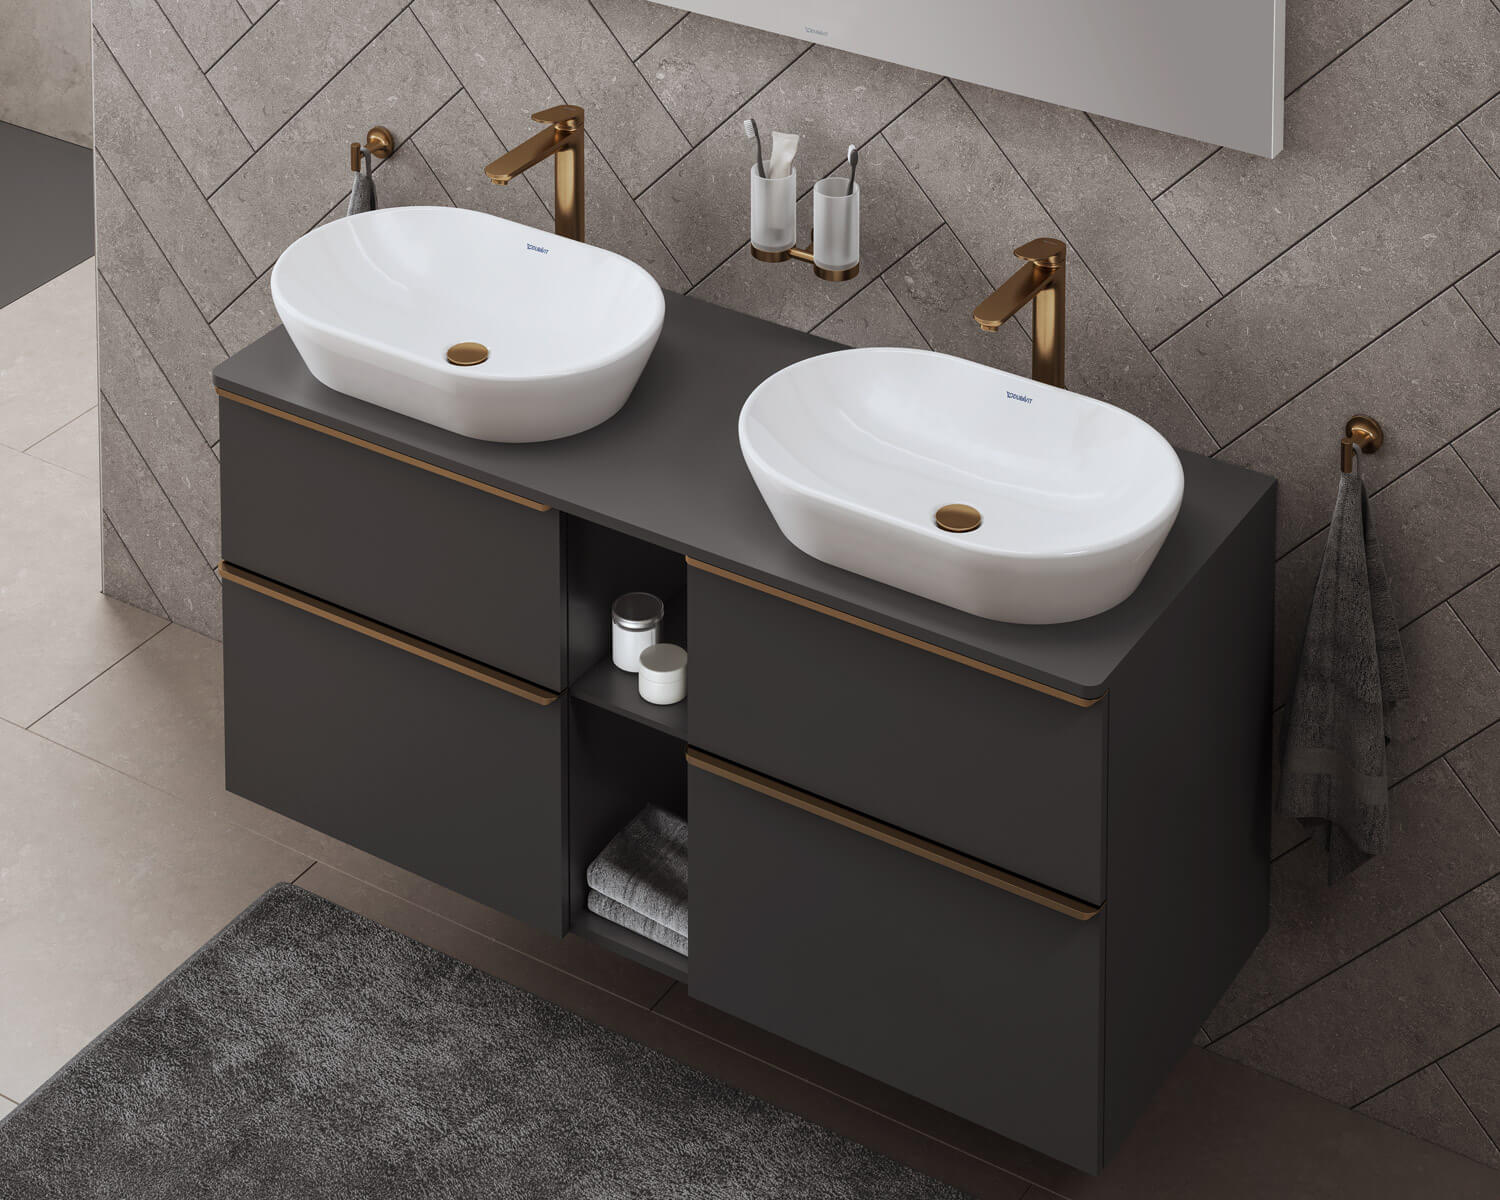 Two countertop sinks with Wave faucet in brushed bronze finish
